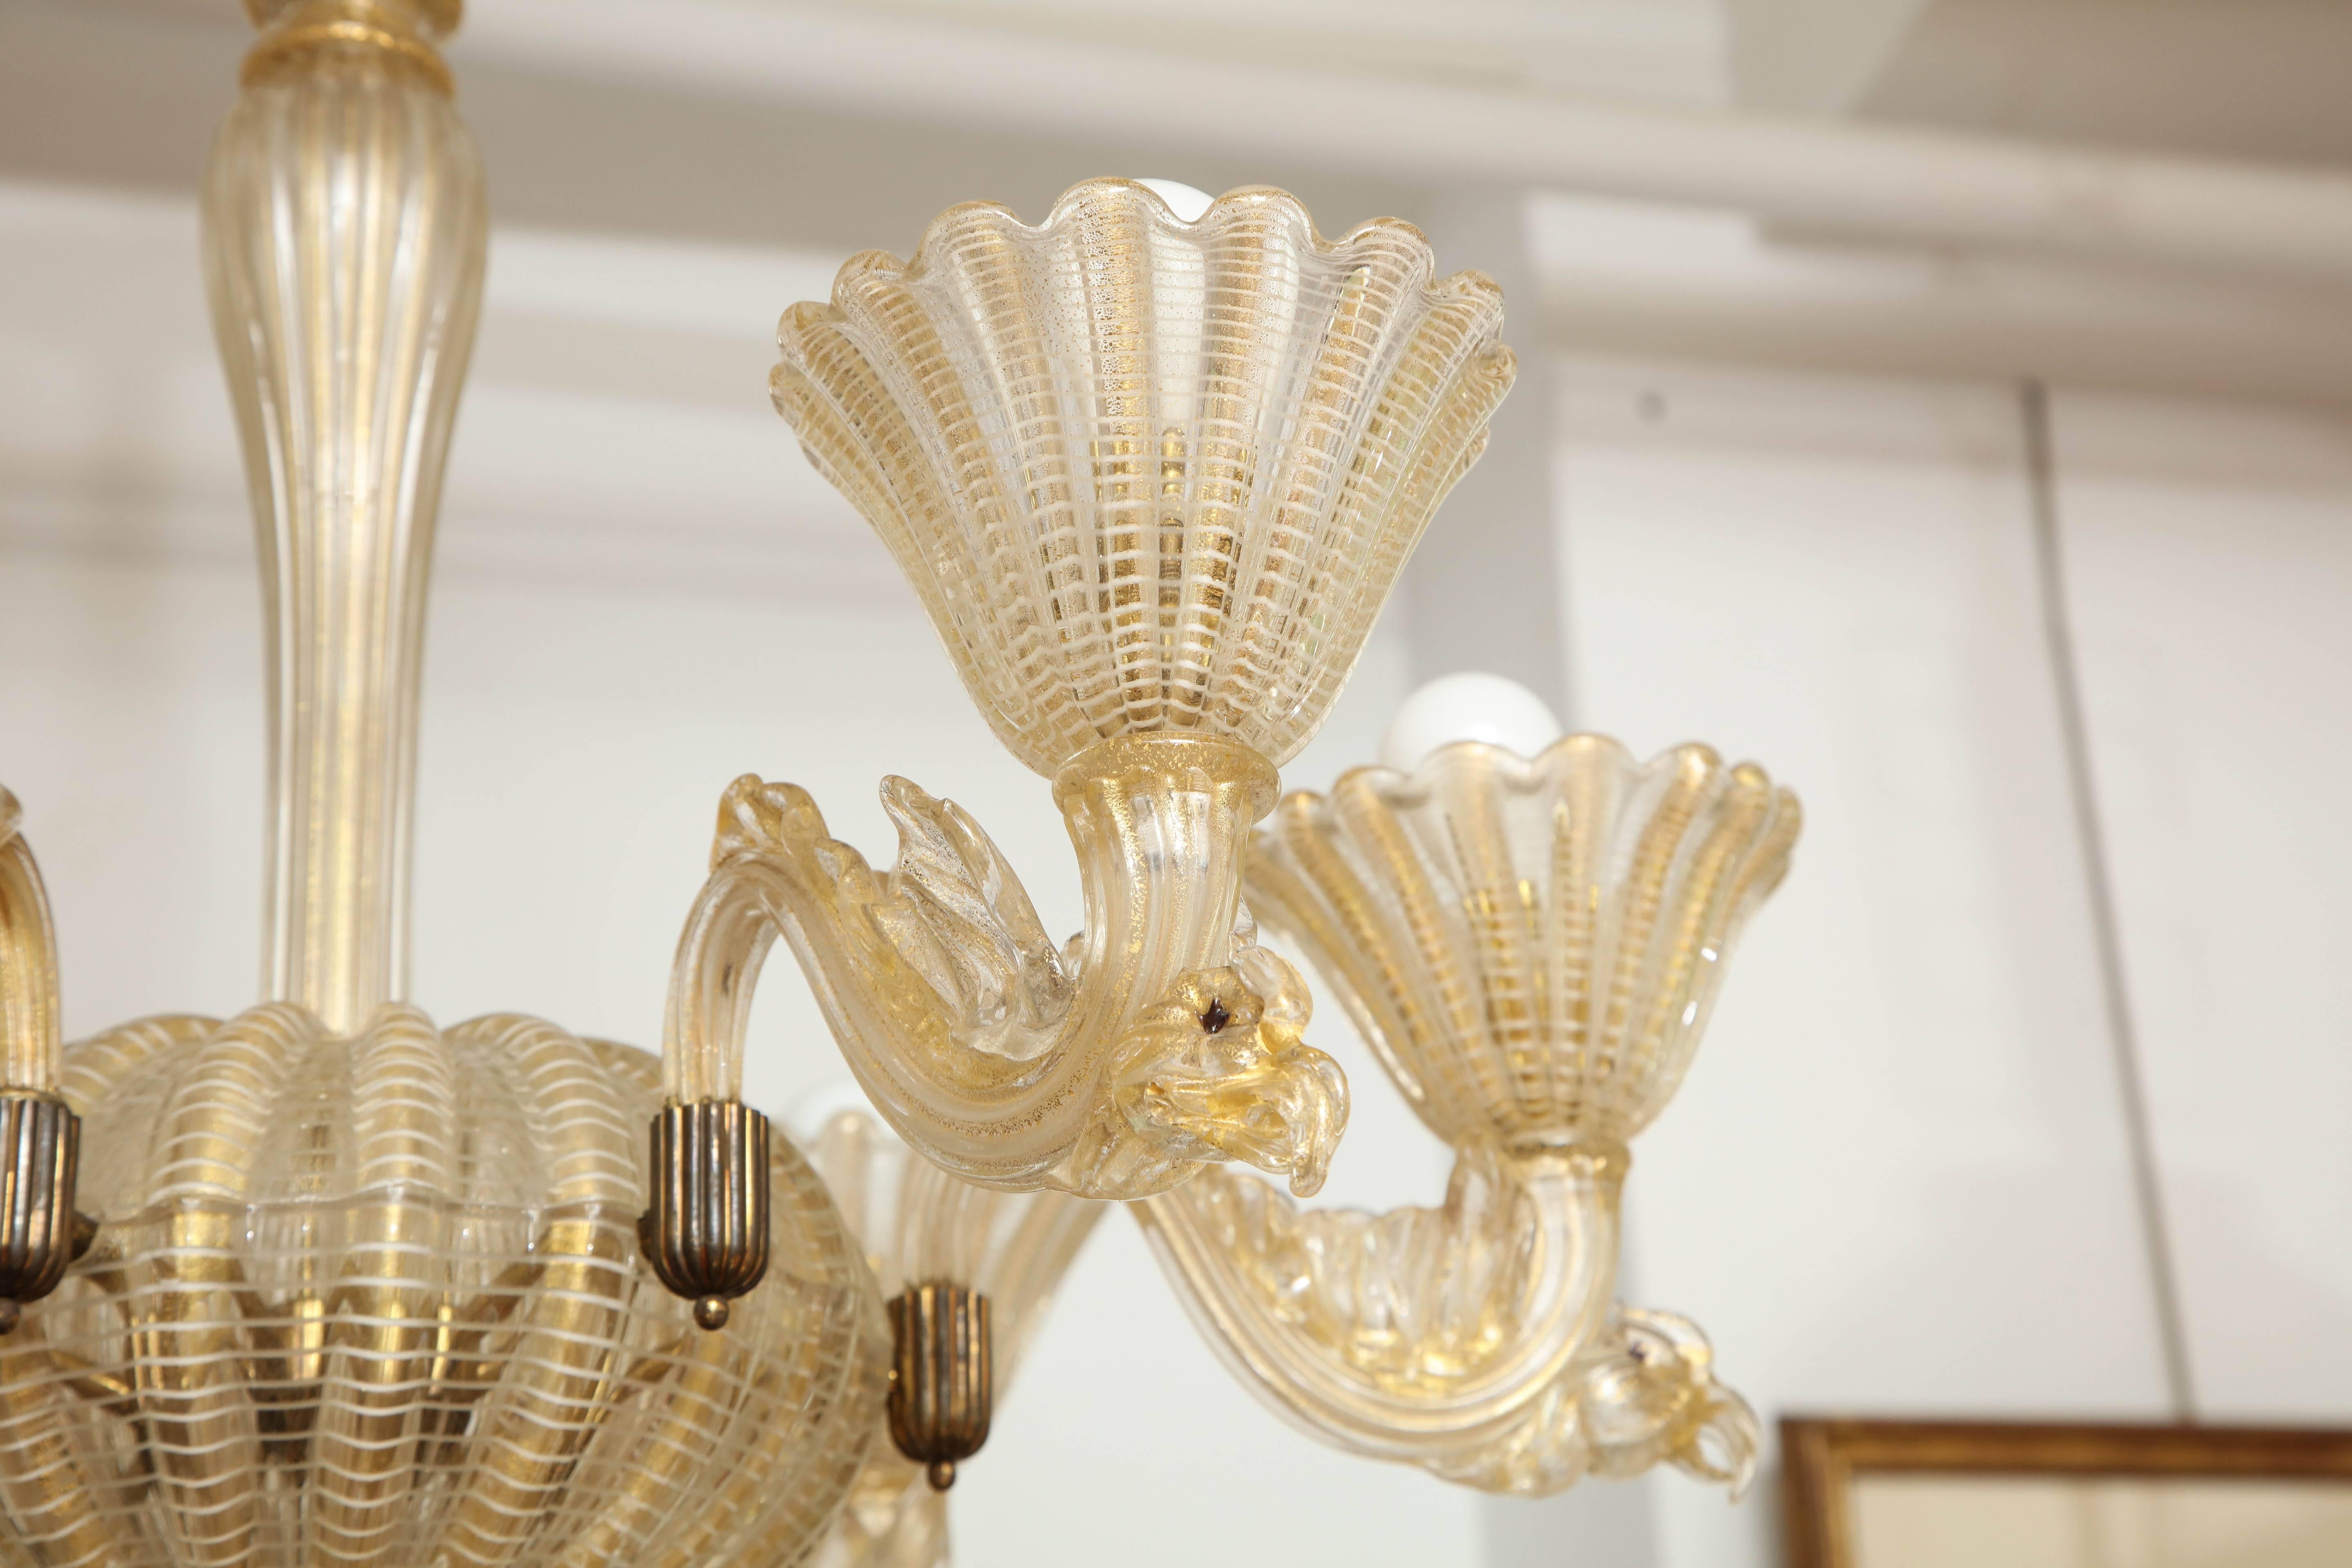 Italian Barovier & Toso Chandelier Made in Venice, 1935 For Sale